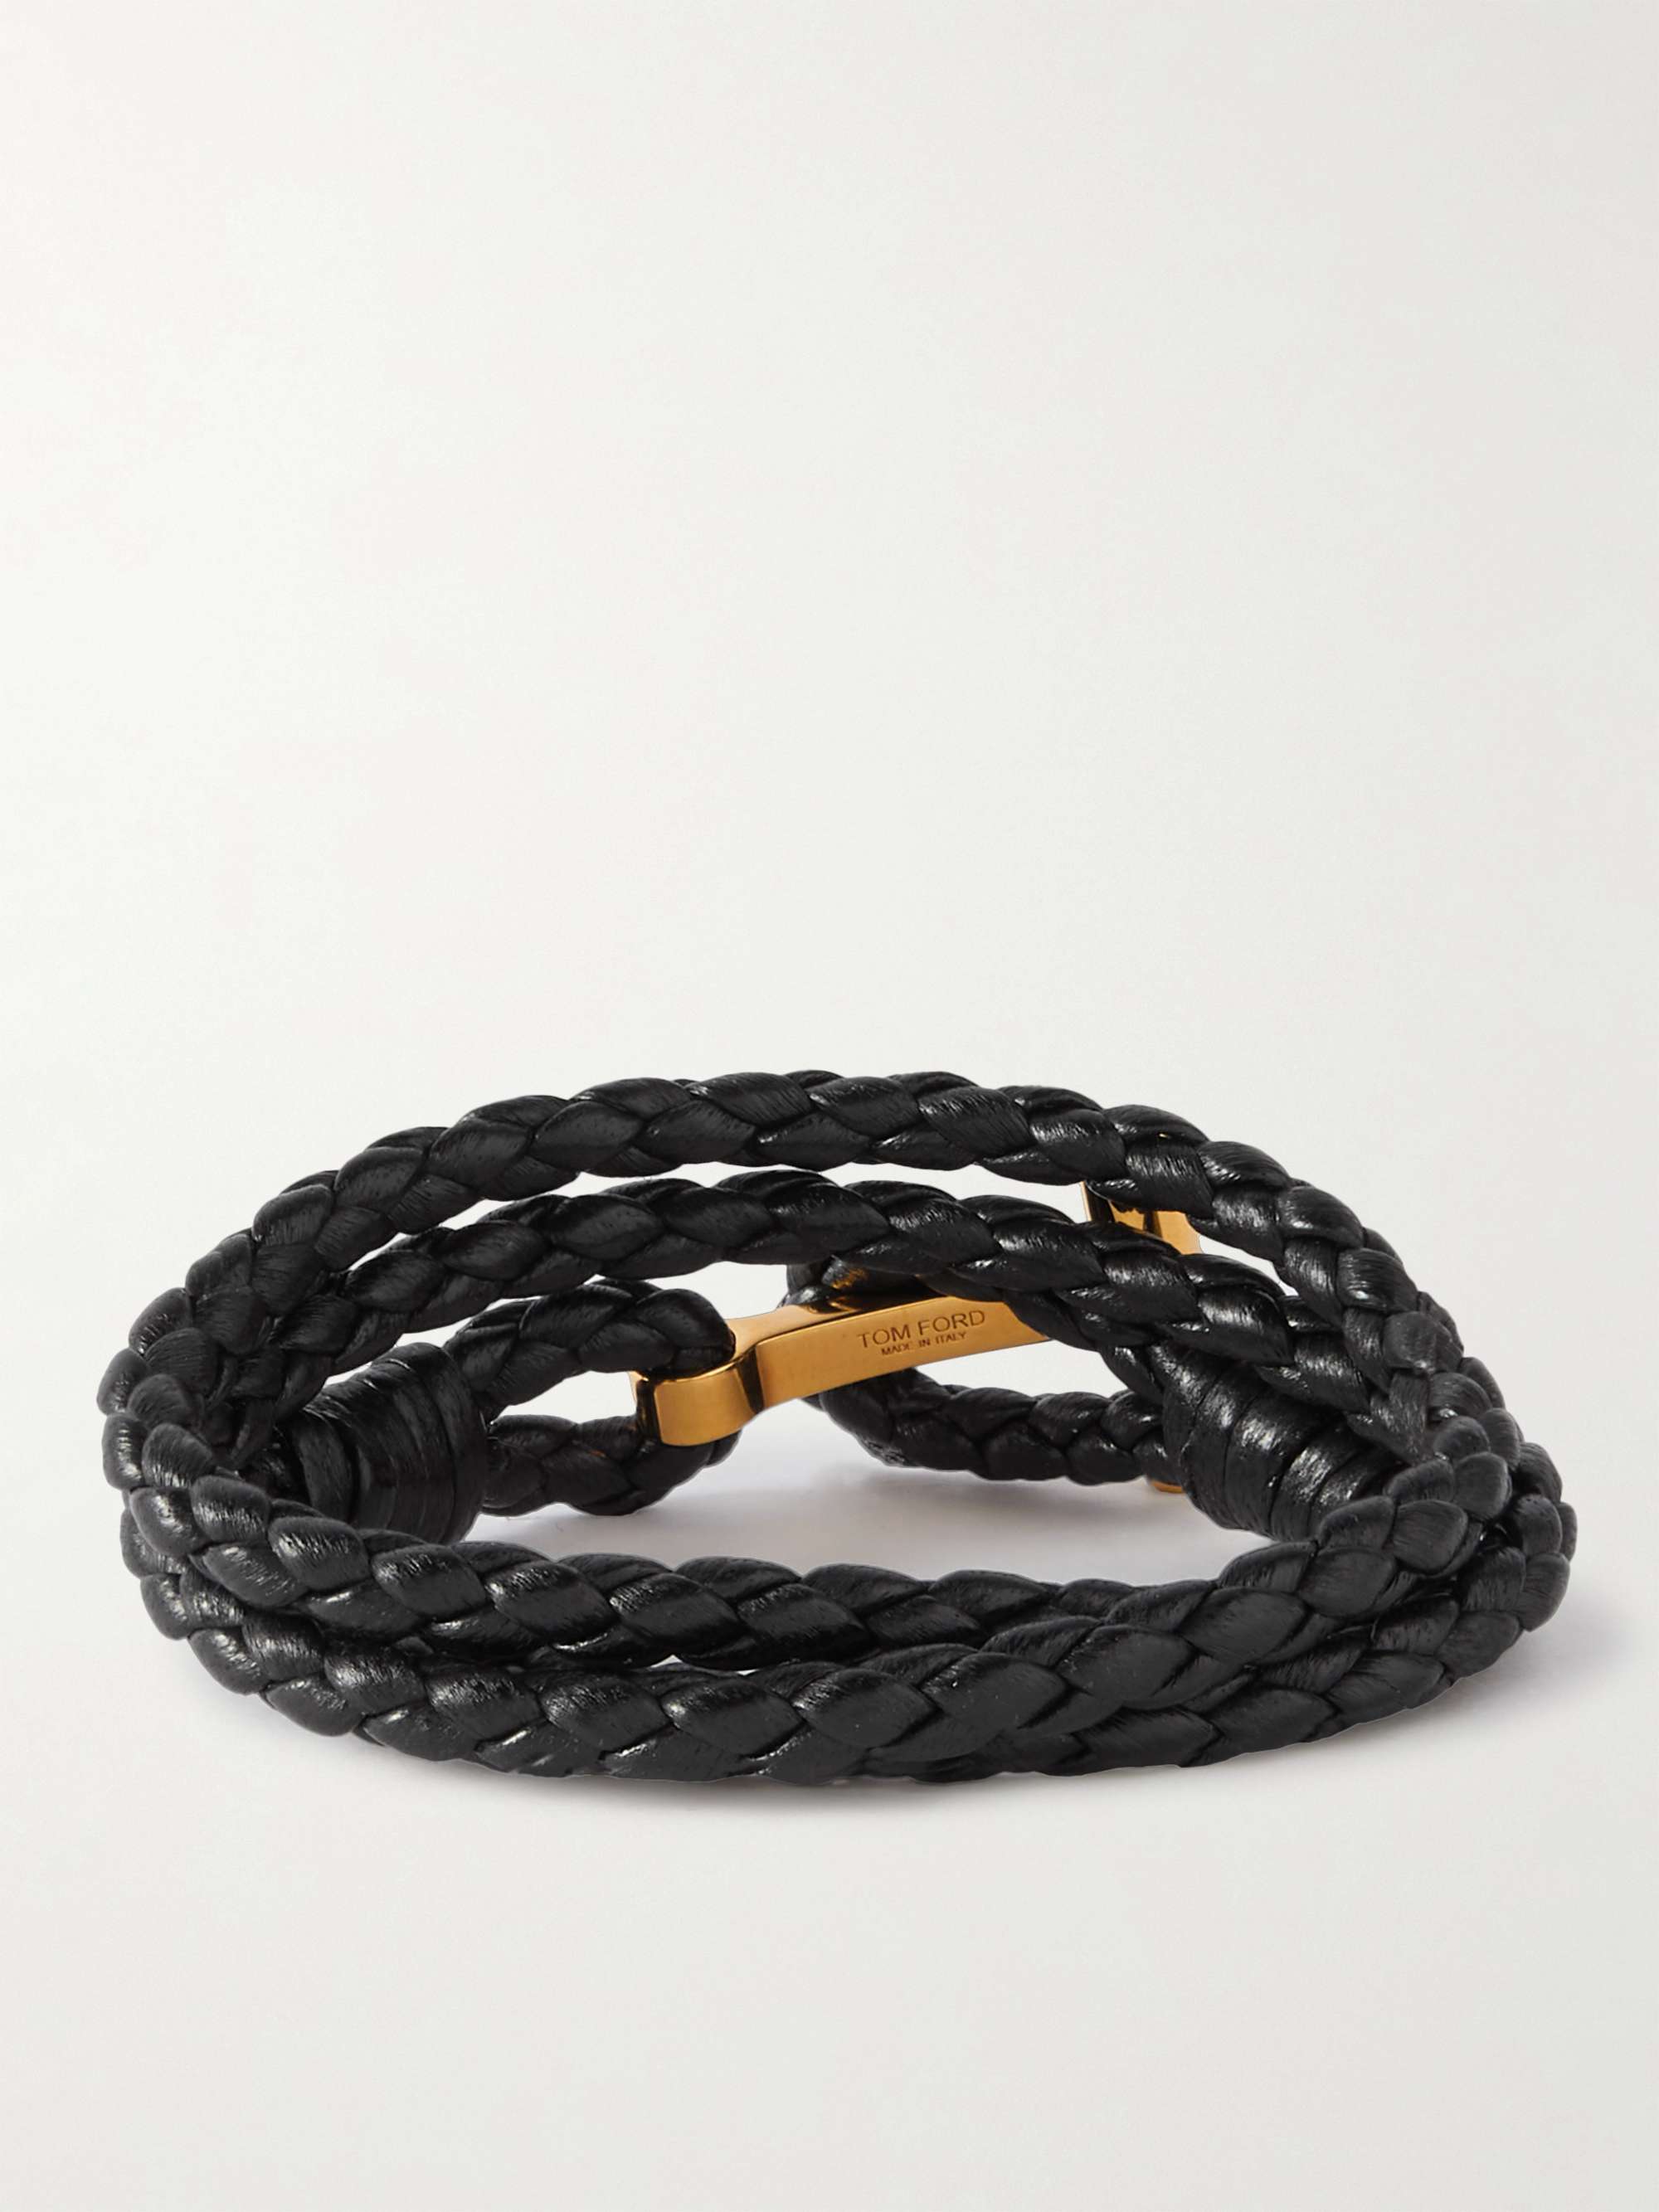 TOM FORD Woven Leather and Silver-Tone Wrap Bracelet